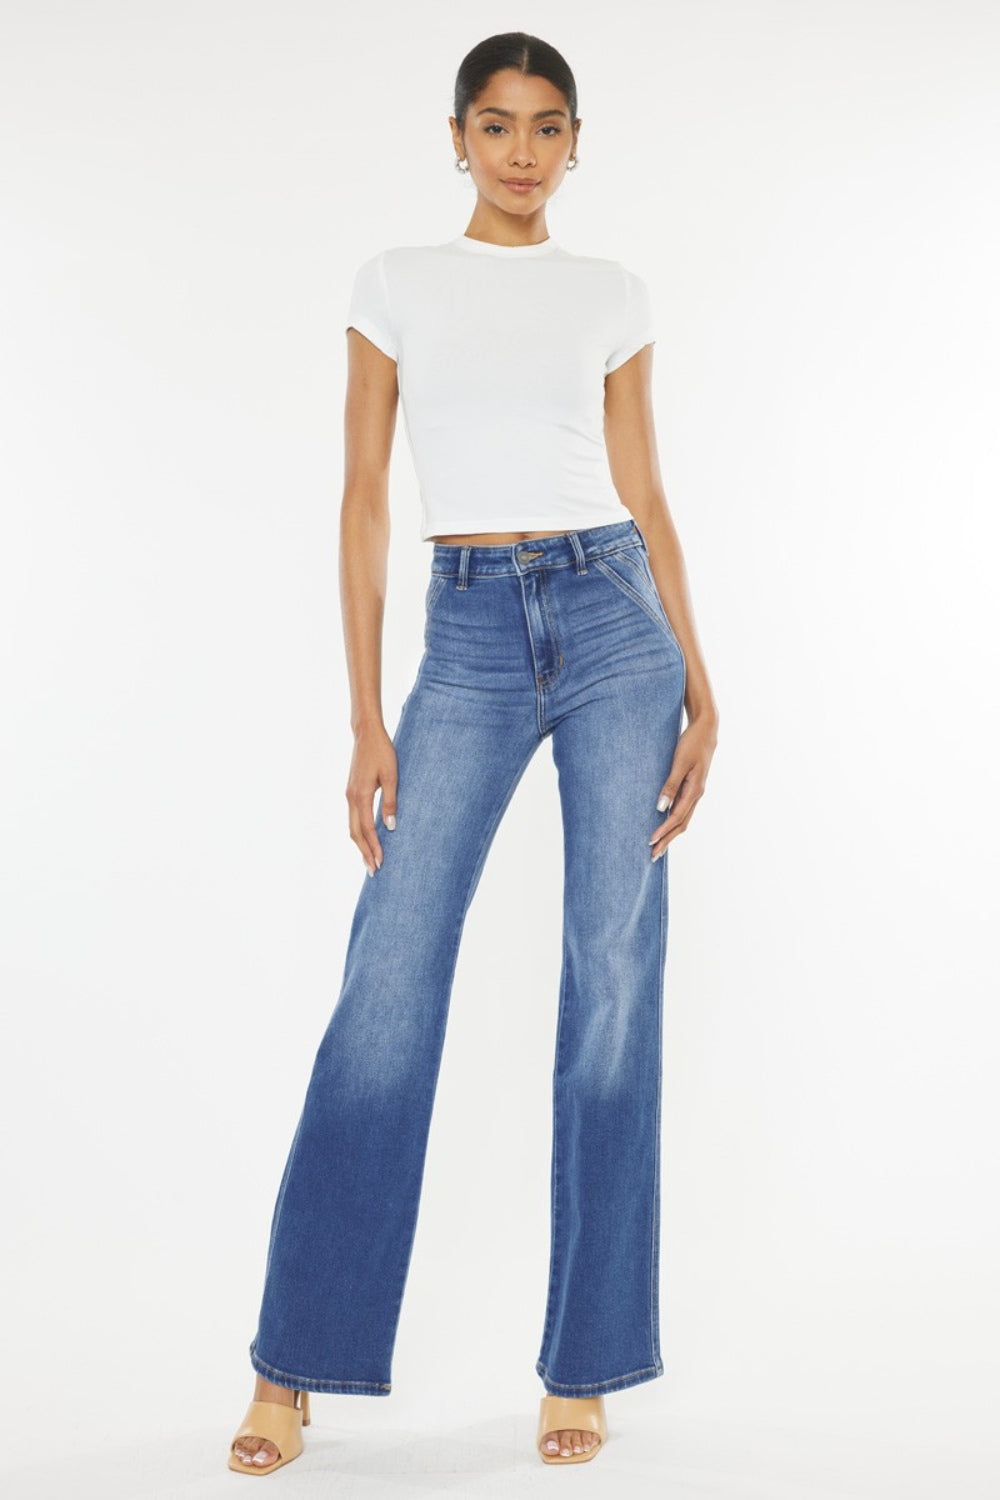 High-waisted blue jeans with a flared leg